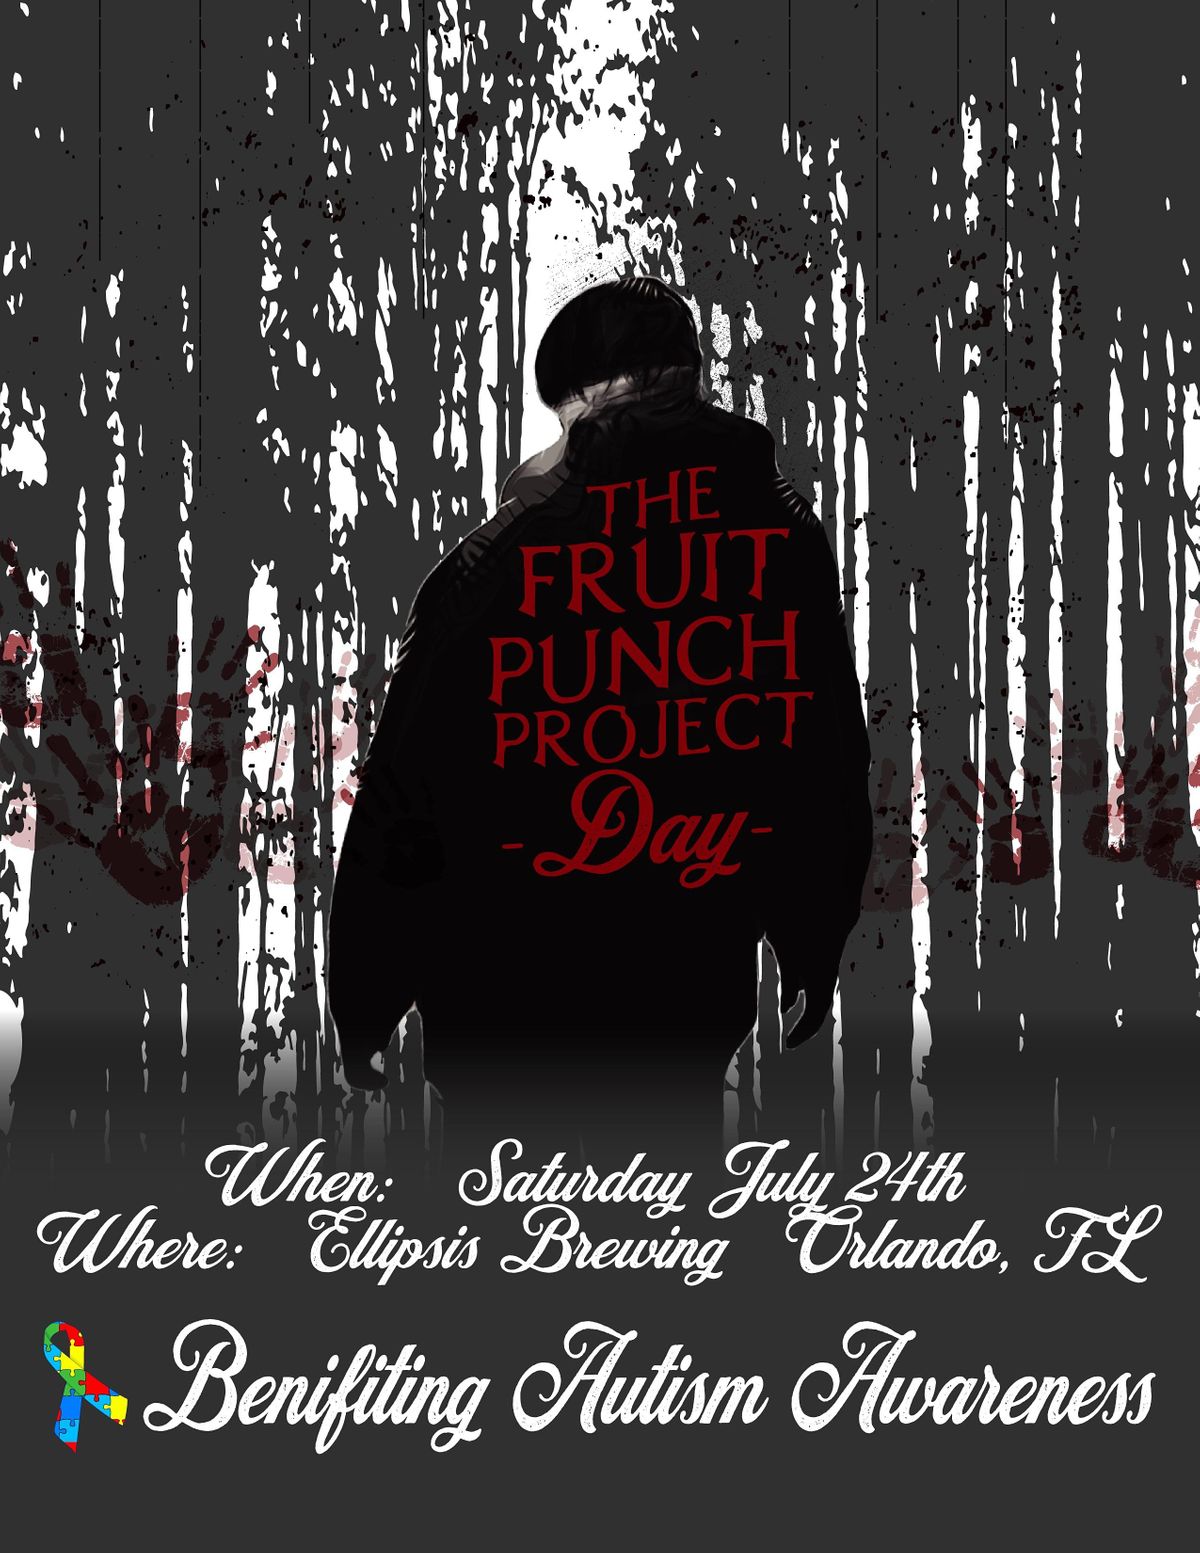 The Fruit Punch Project Day